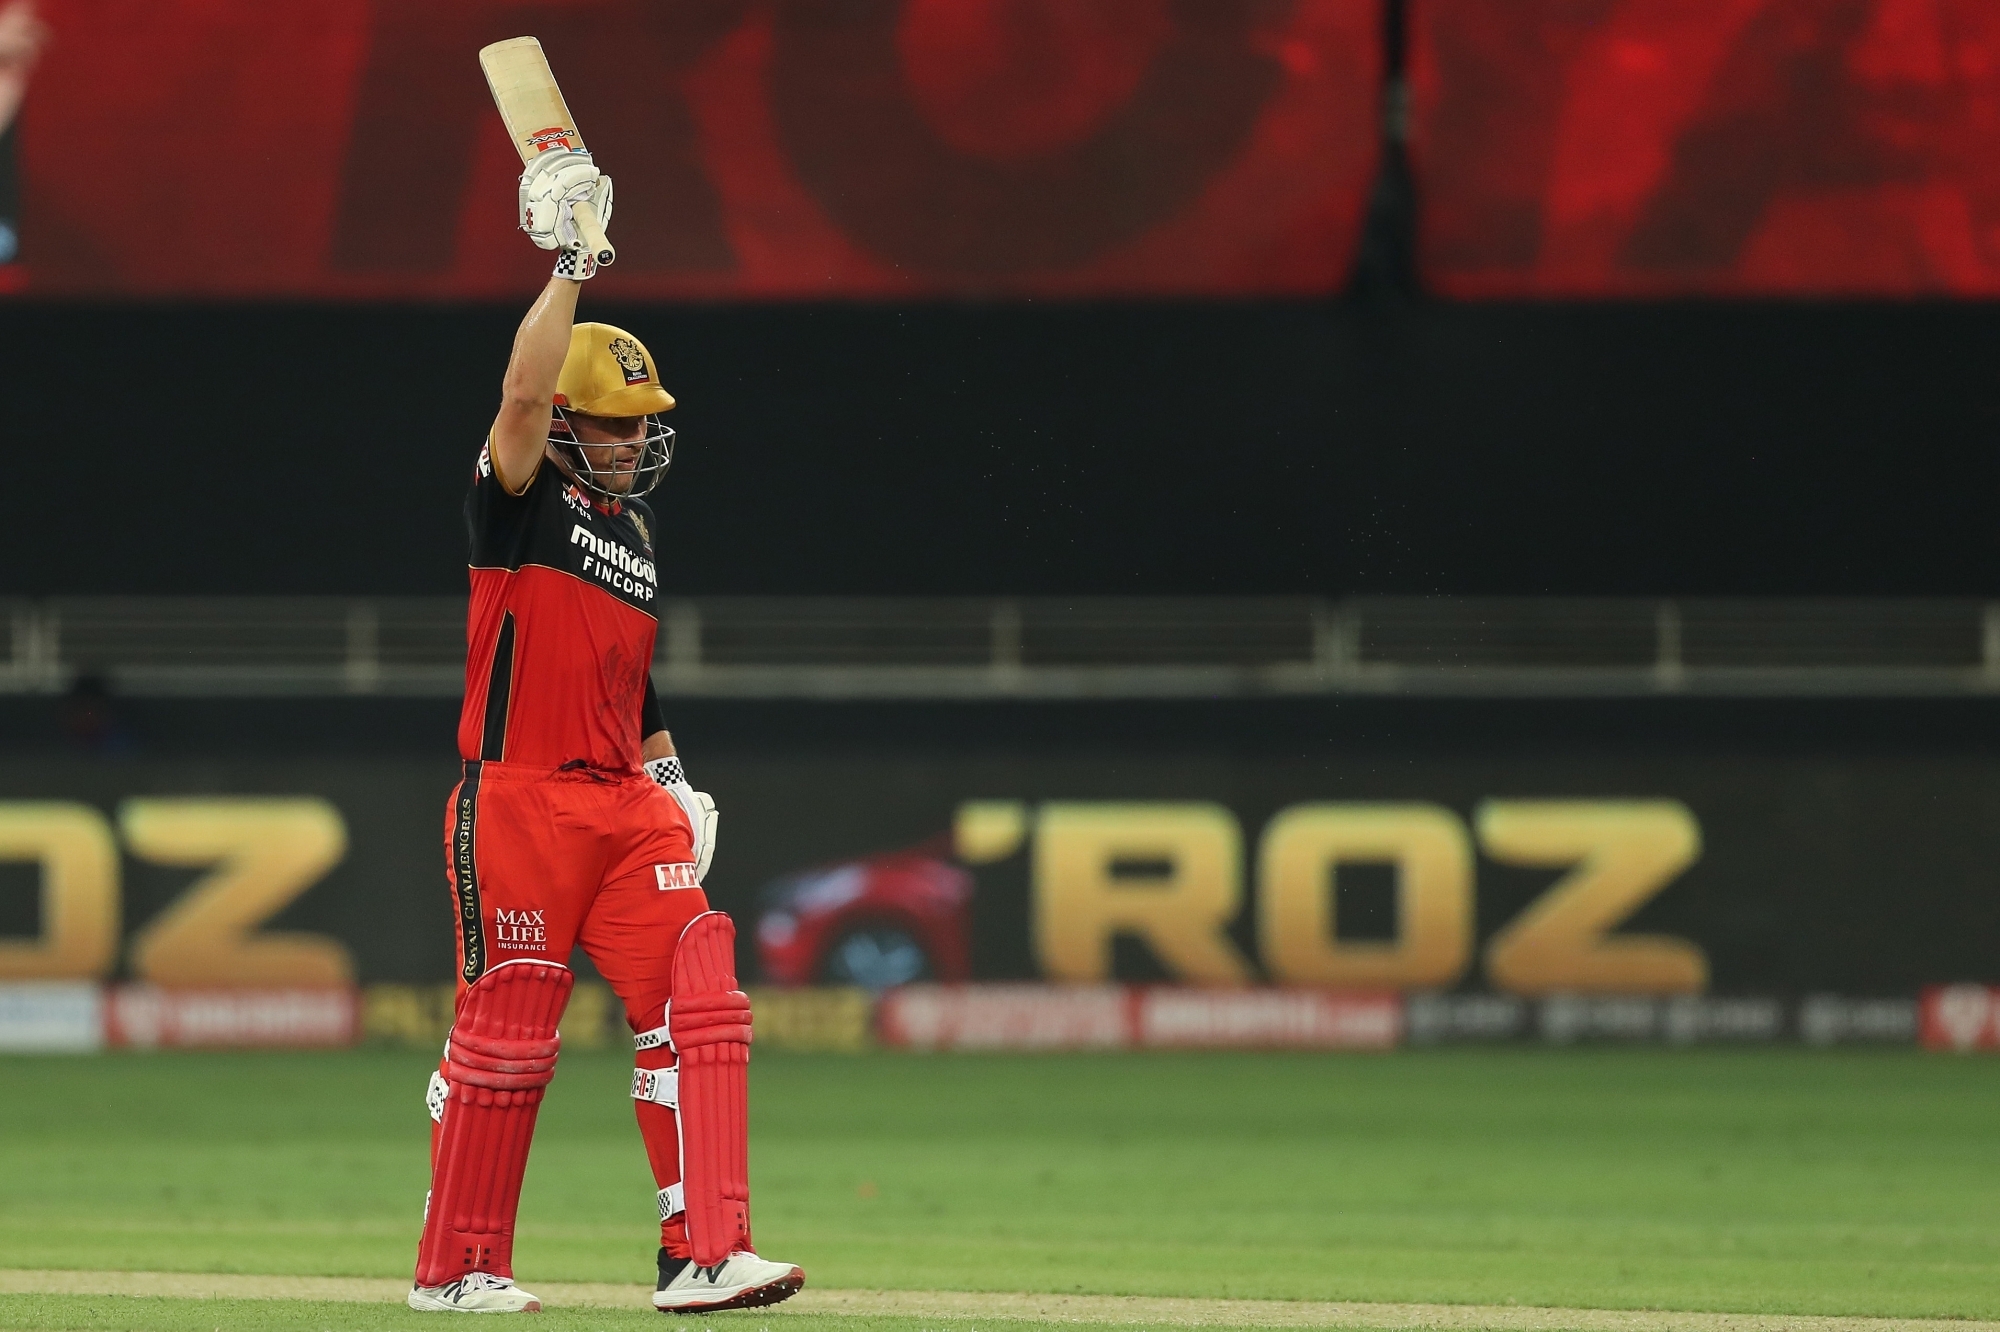 Aaron Finch's performance for his 8th IPL franchise was not up to par | BCCI/IPL